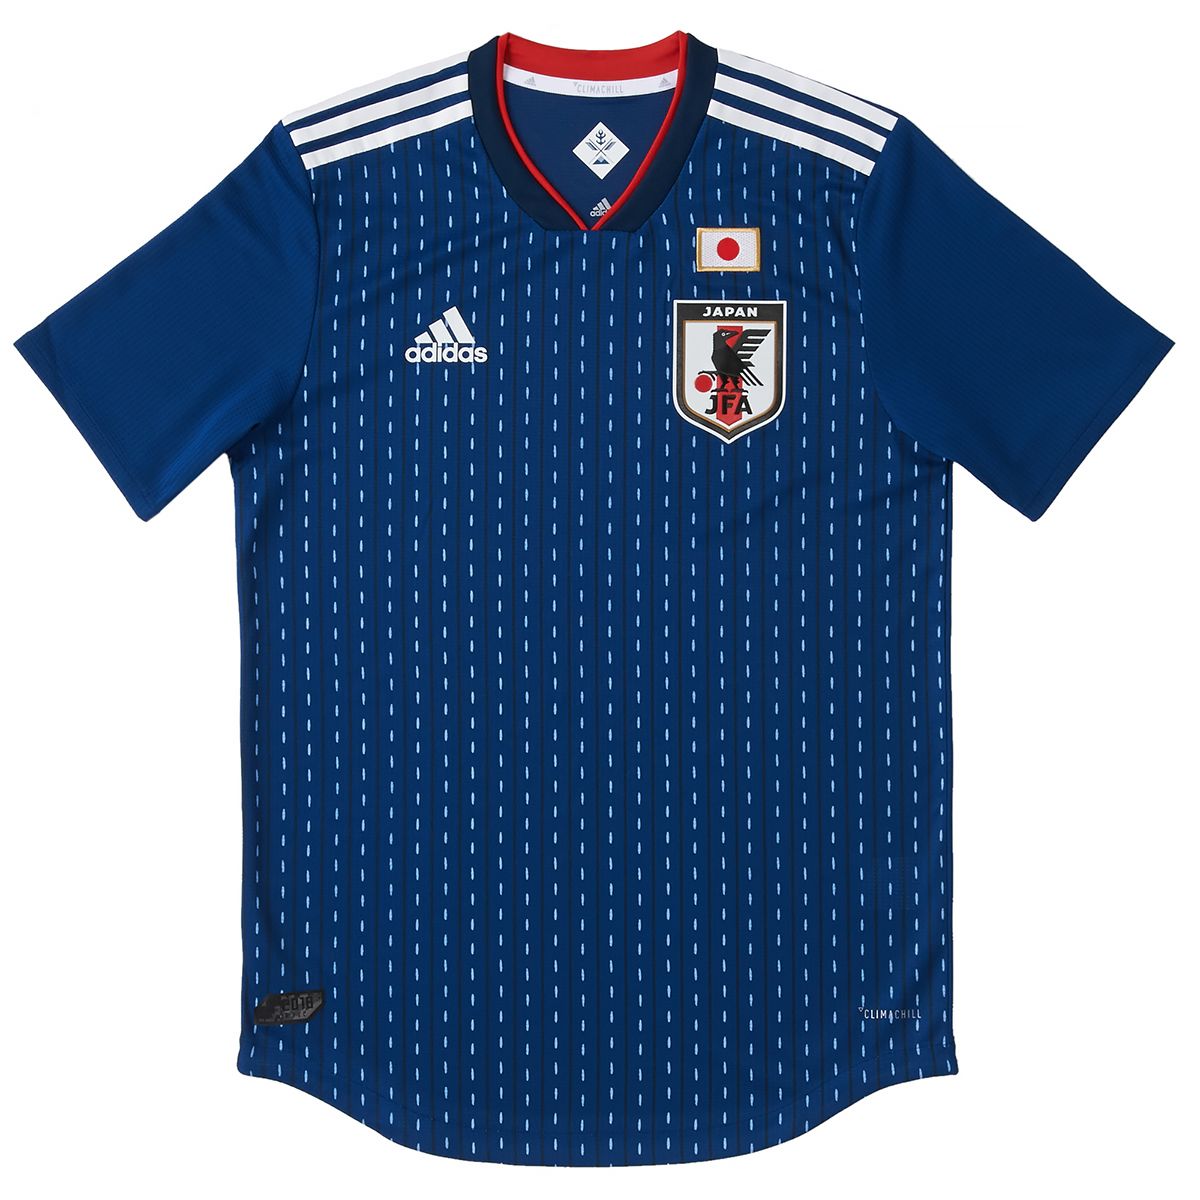 Past and Present Japanese National Soccer Team World Cup Uniforms